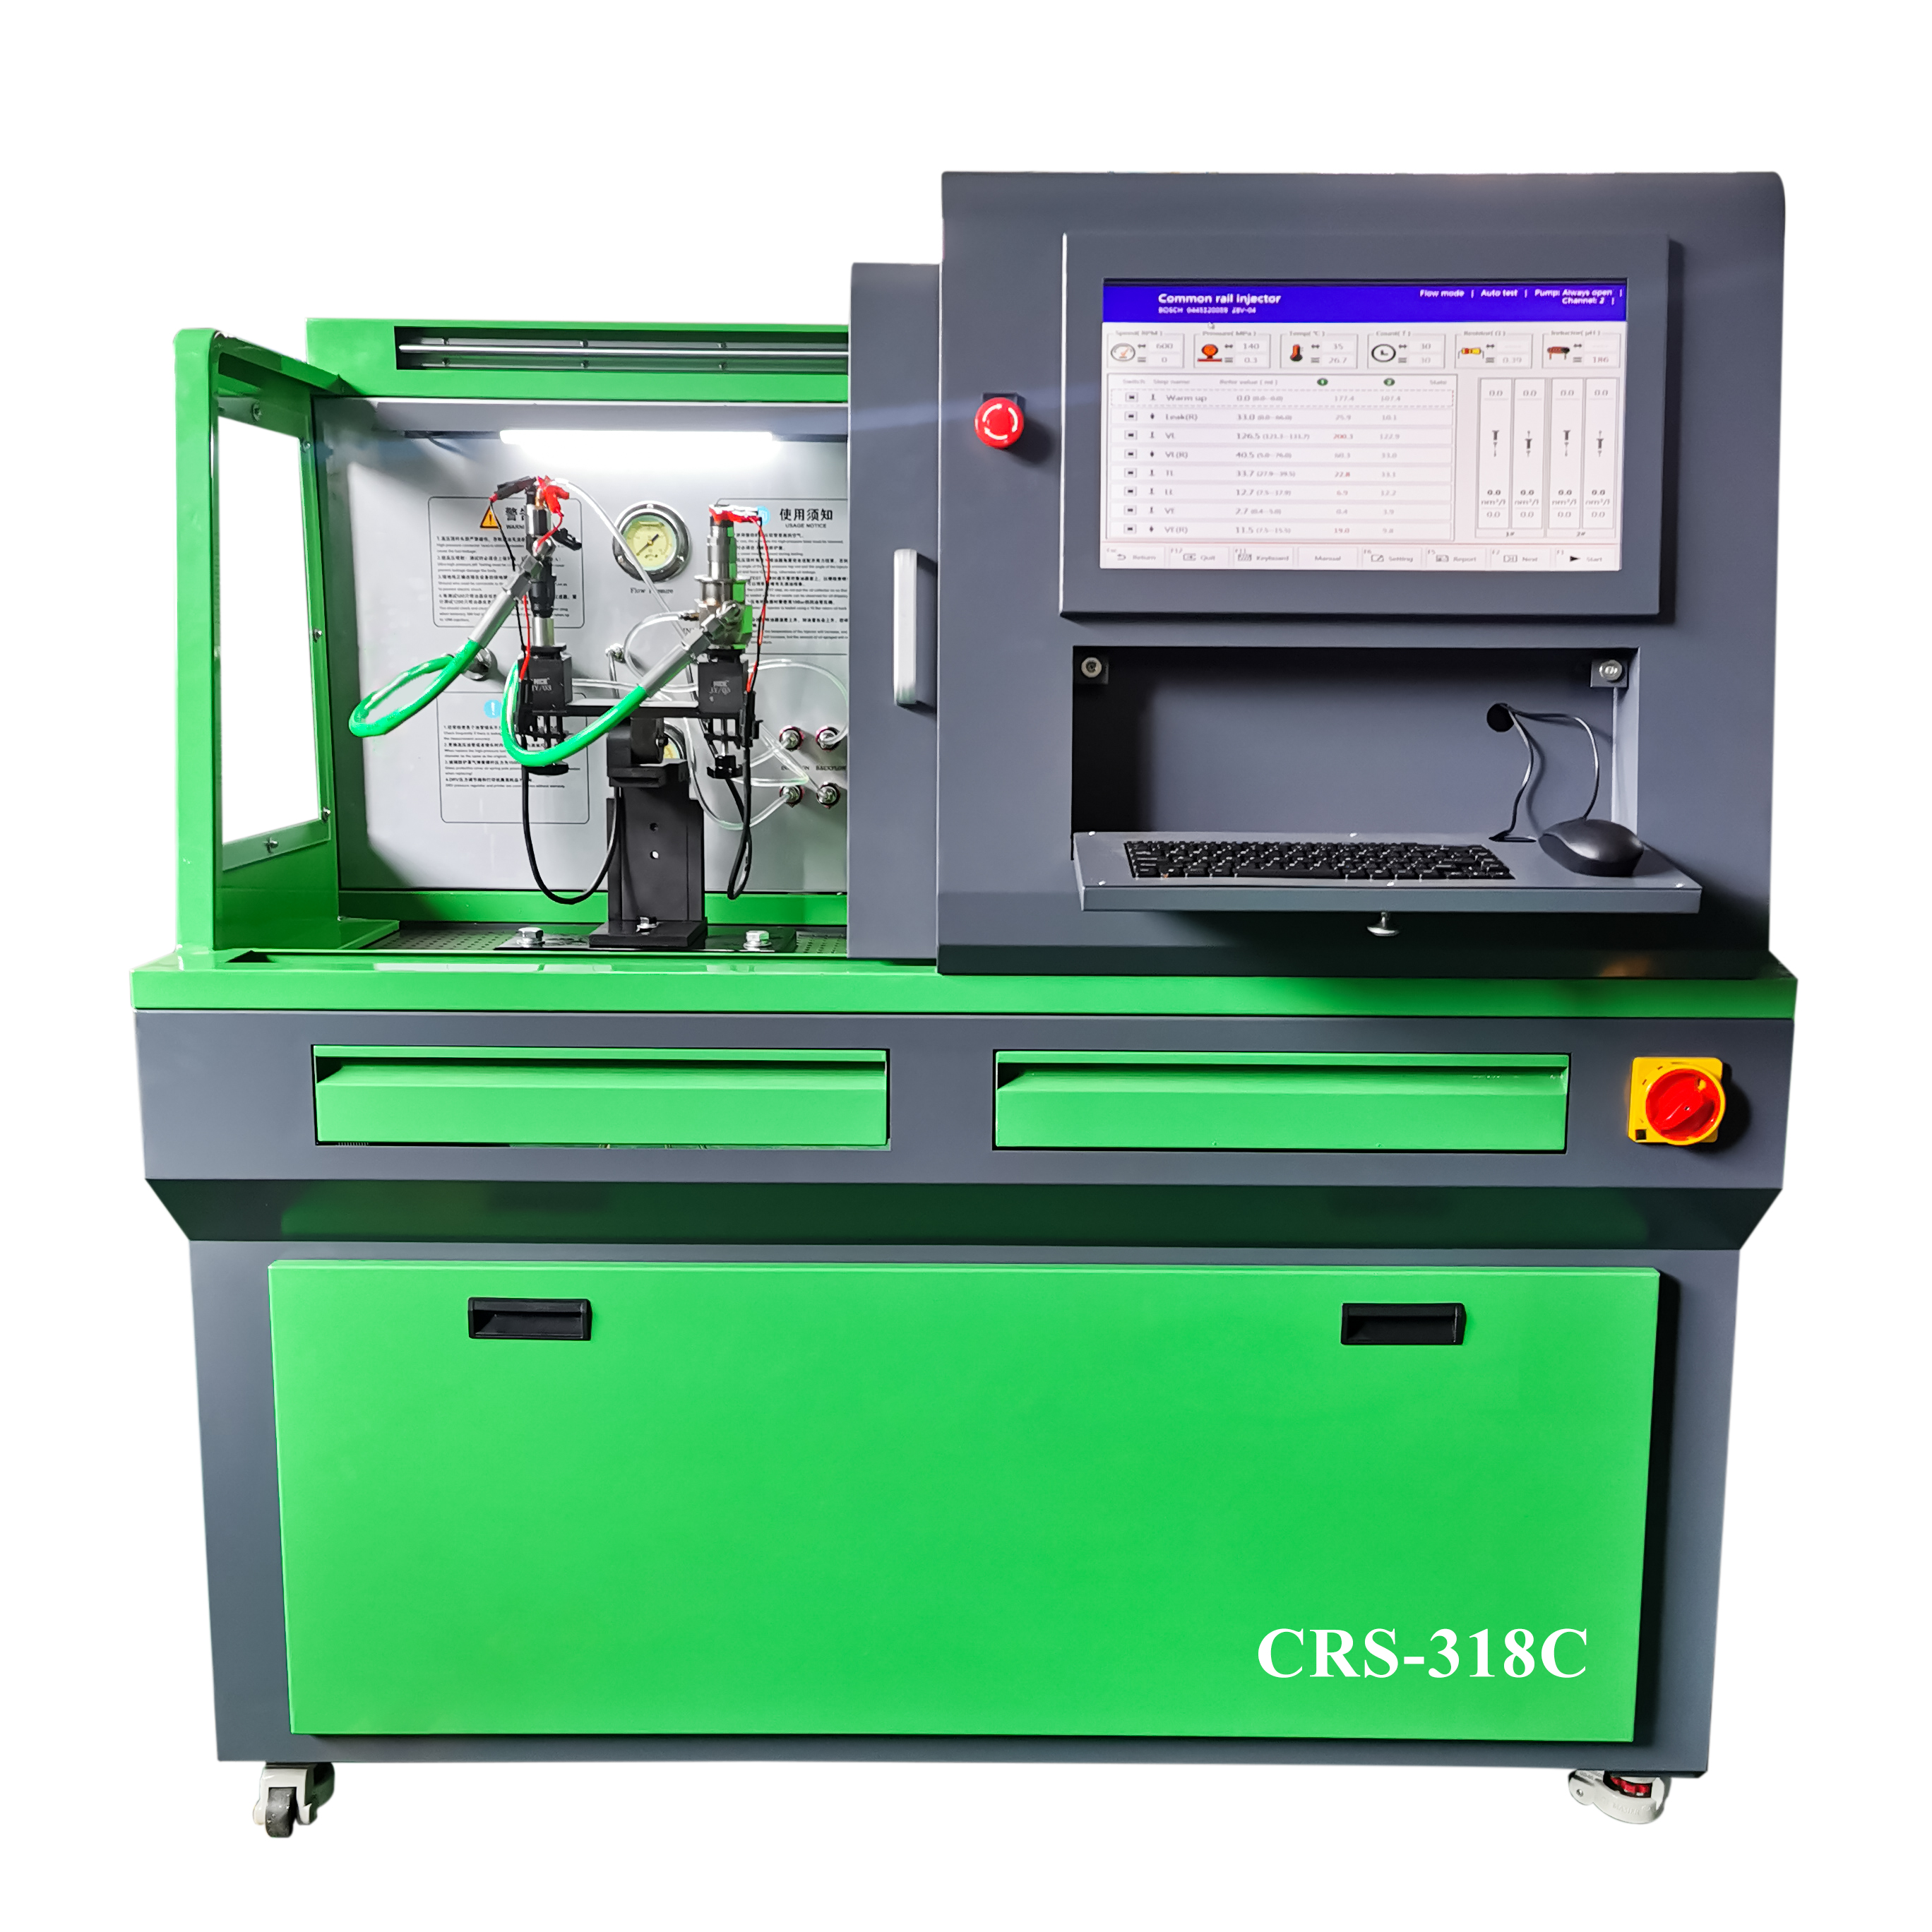 New Model Dual Common Rail Injector Test Bench – CRS-318C